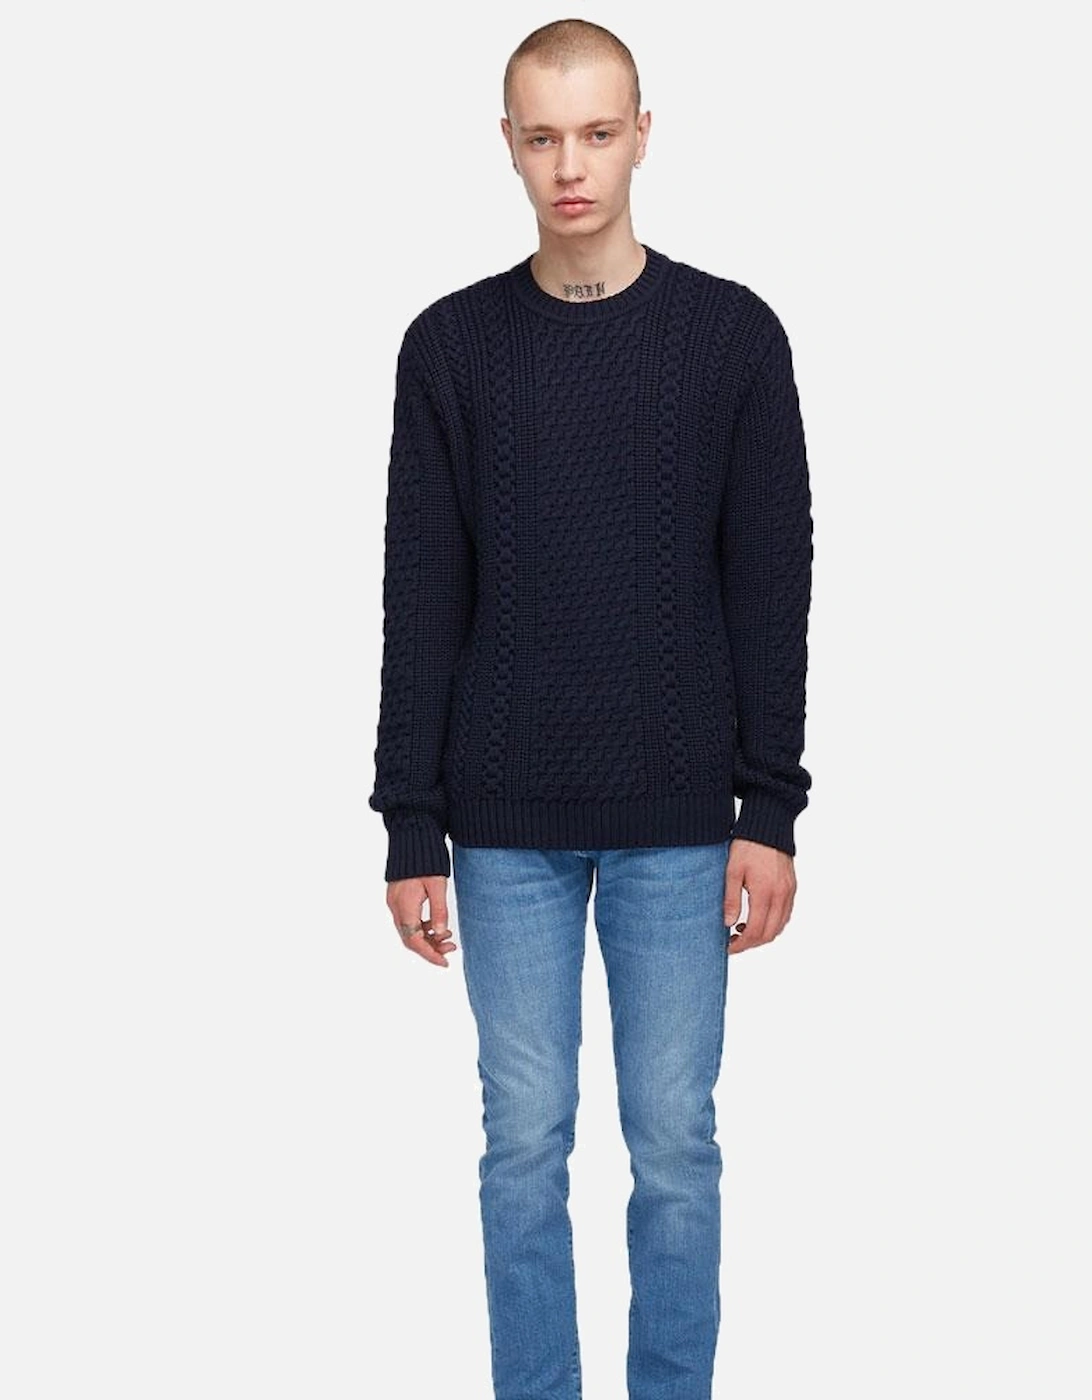 United Cable Knit Jumper - Navy